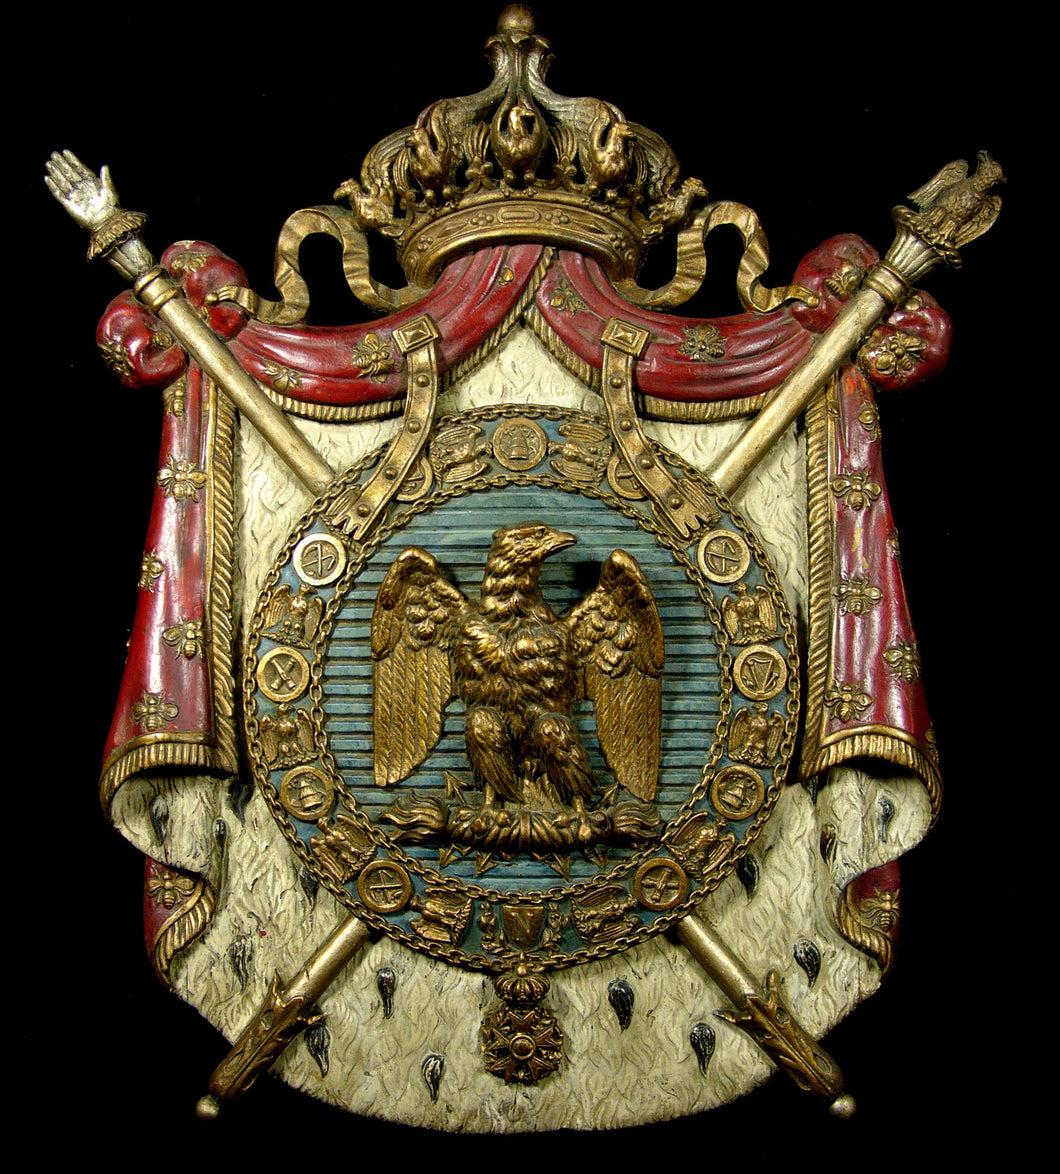 A 19th Century Polychrome and Gilt Wood Napoleonic Coat of Arms, Second Empire (1852-70)